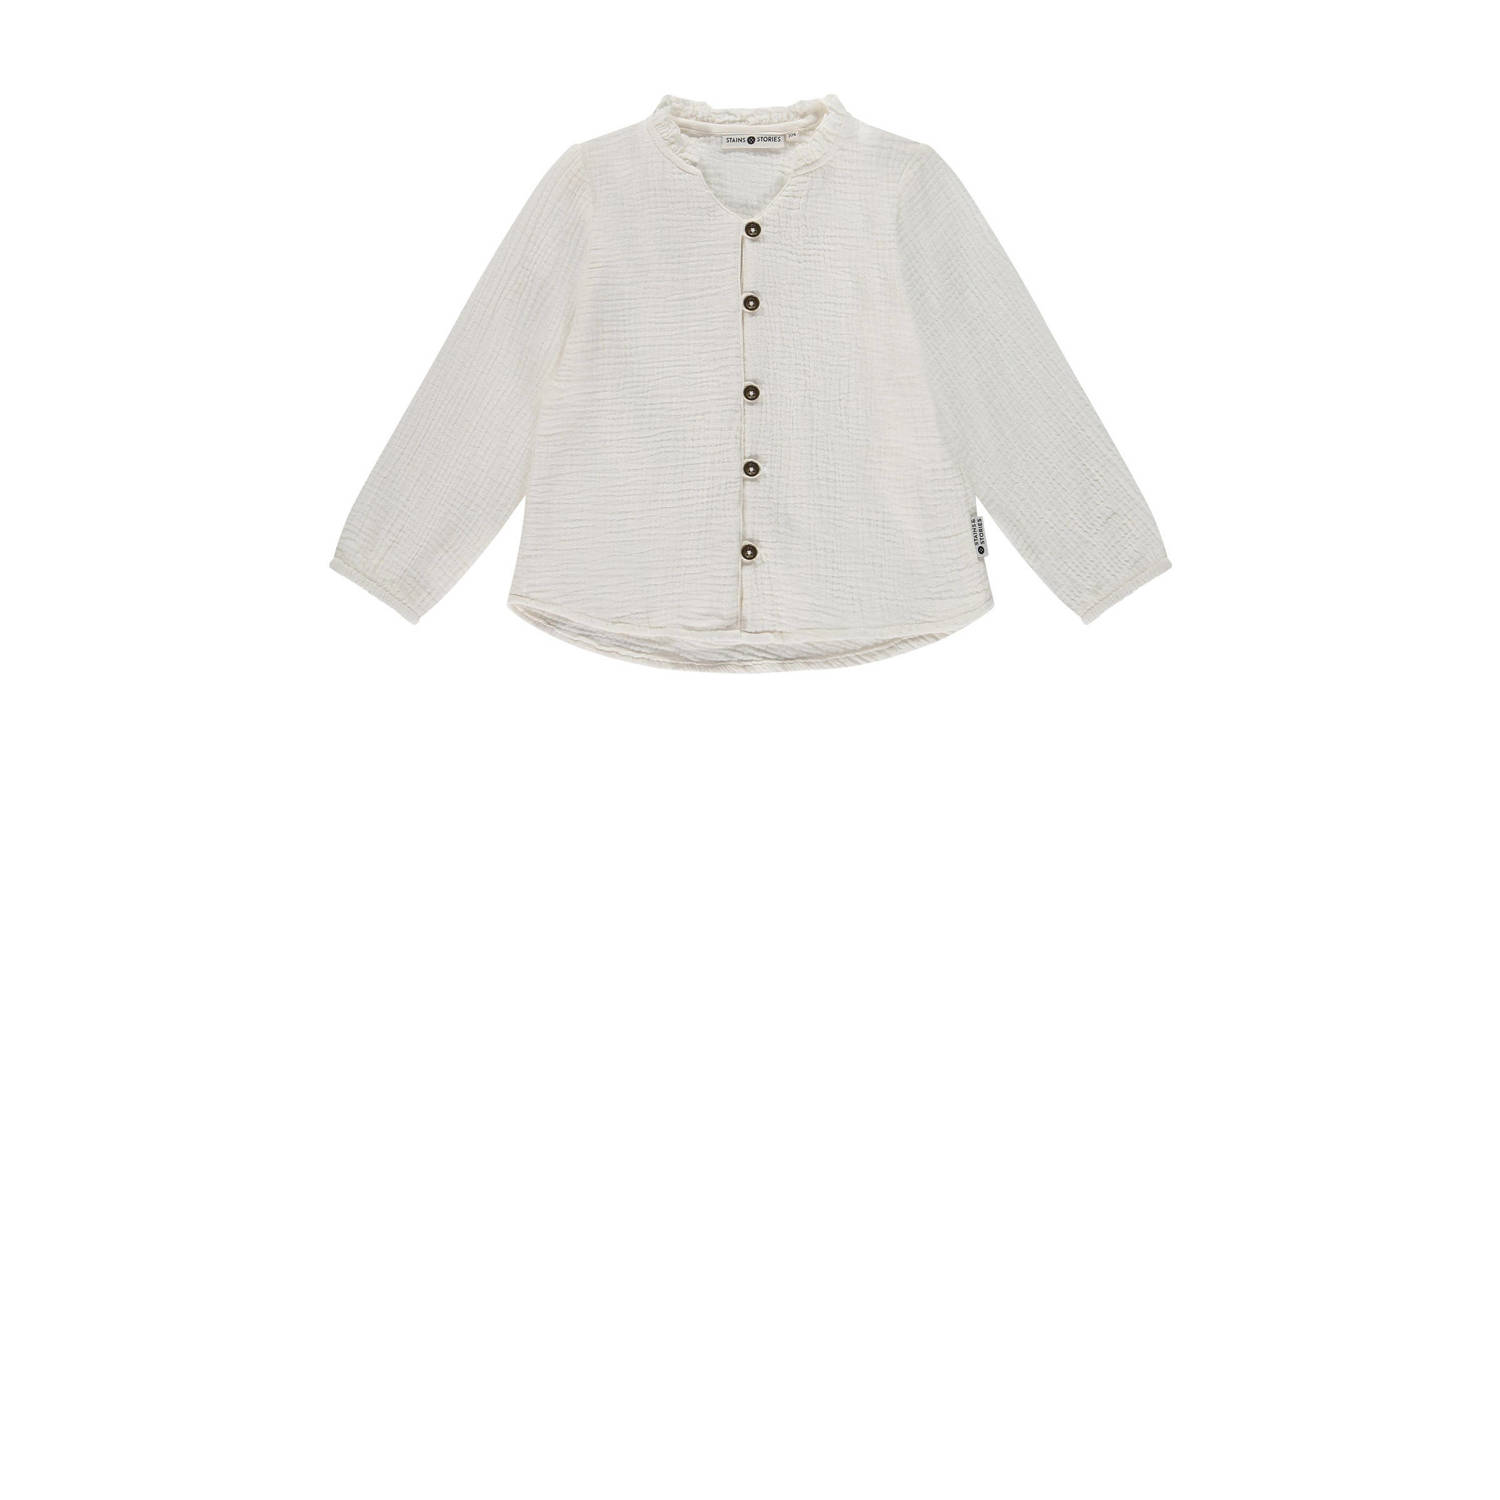 Stains&Stories blouse offwhite